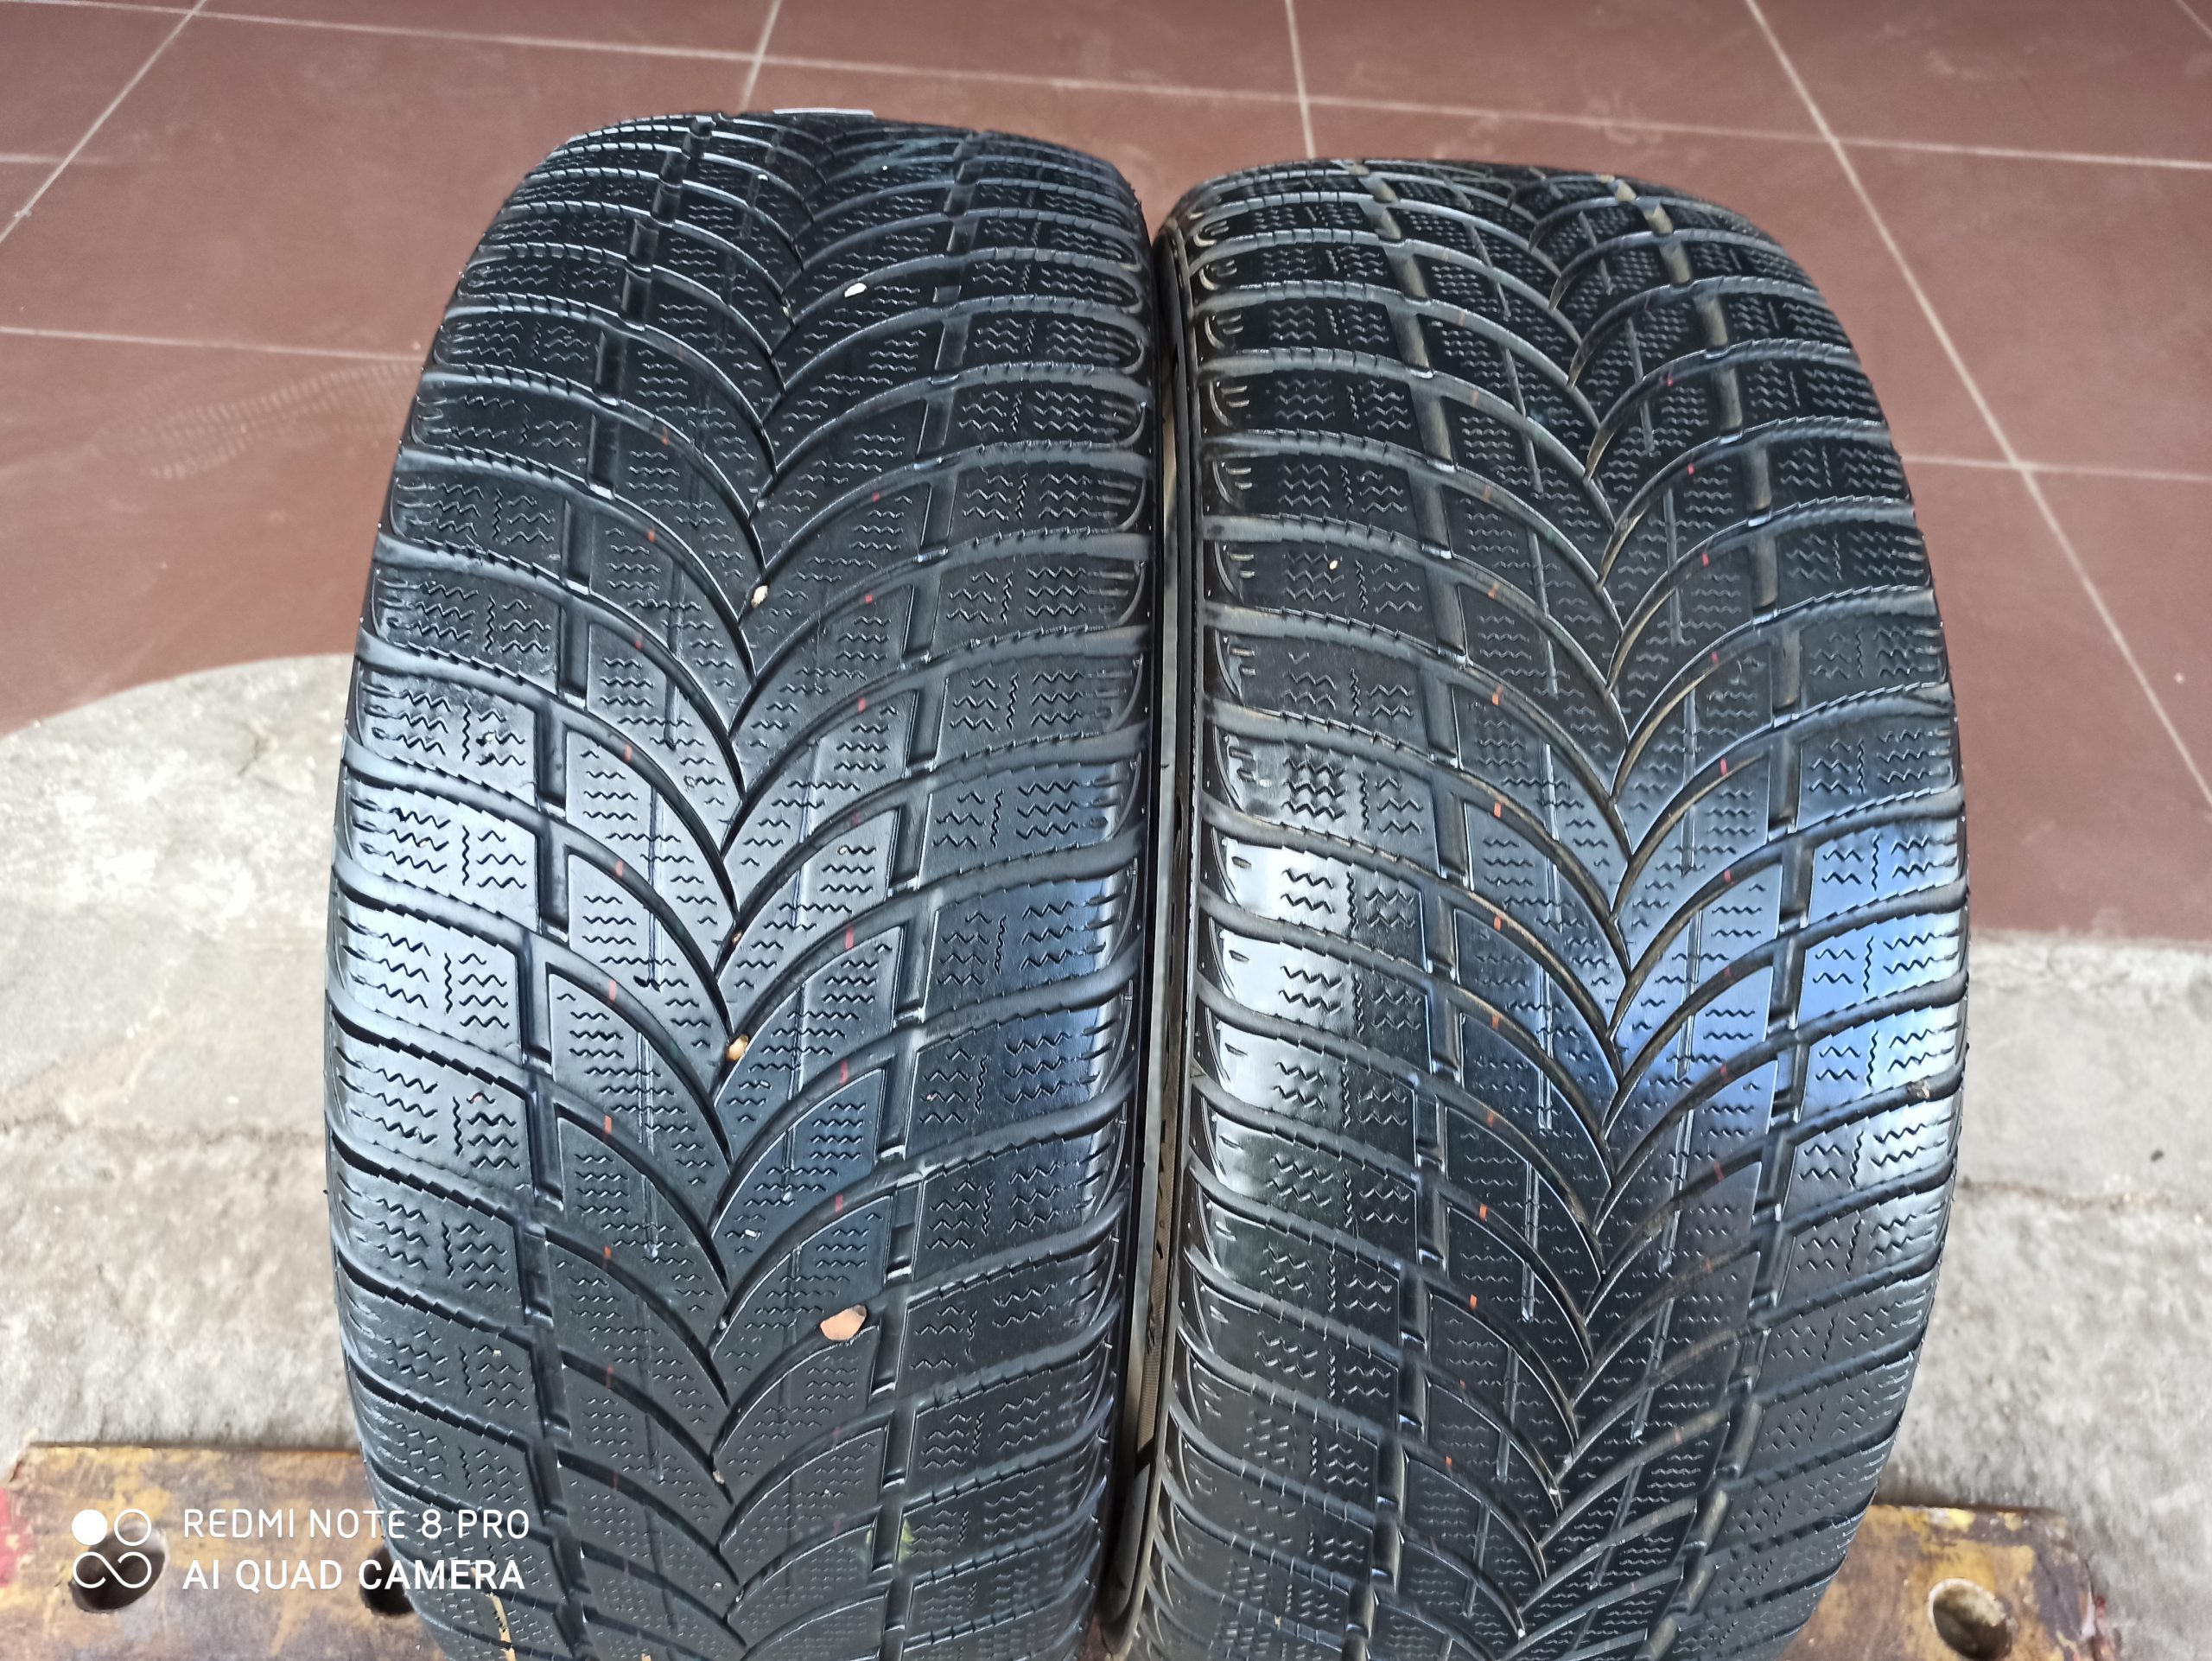 Купить максис браво 215 65 16. 215/50r17 Maxxis ma-z3 91w. 225/60 R17 Maxxis s-Pro 99h. 225/60 R17 Maxxis CV-01 99v.